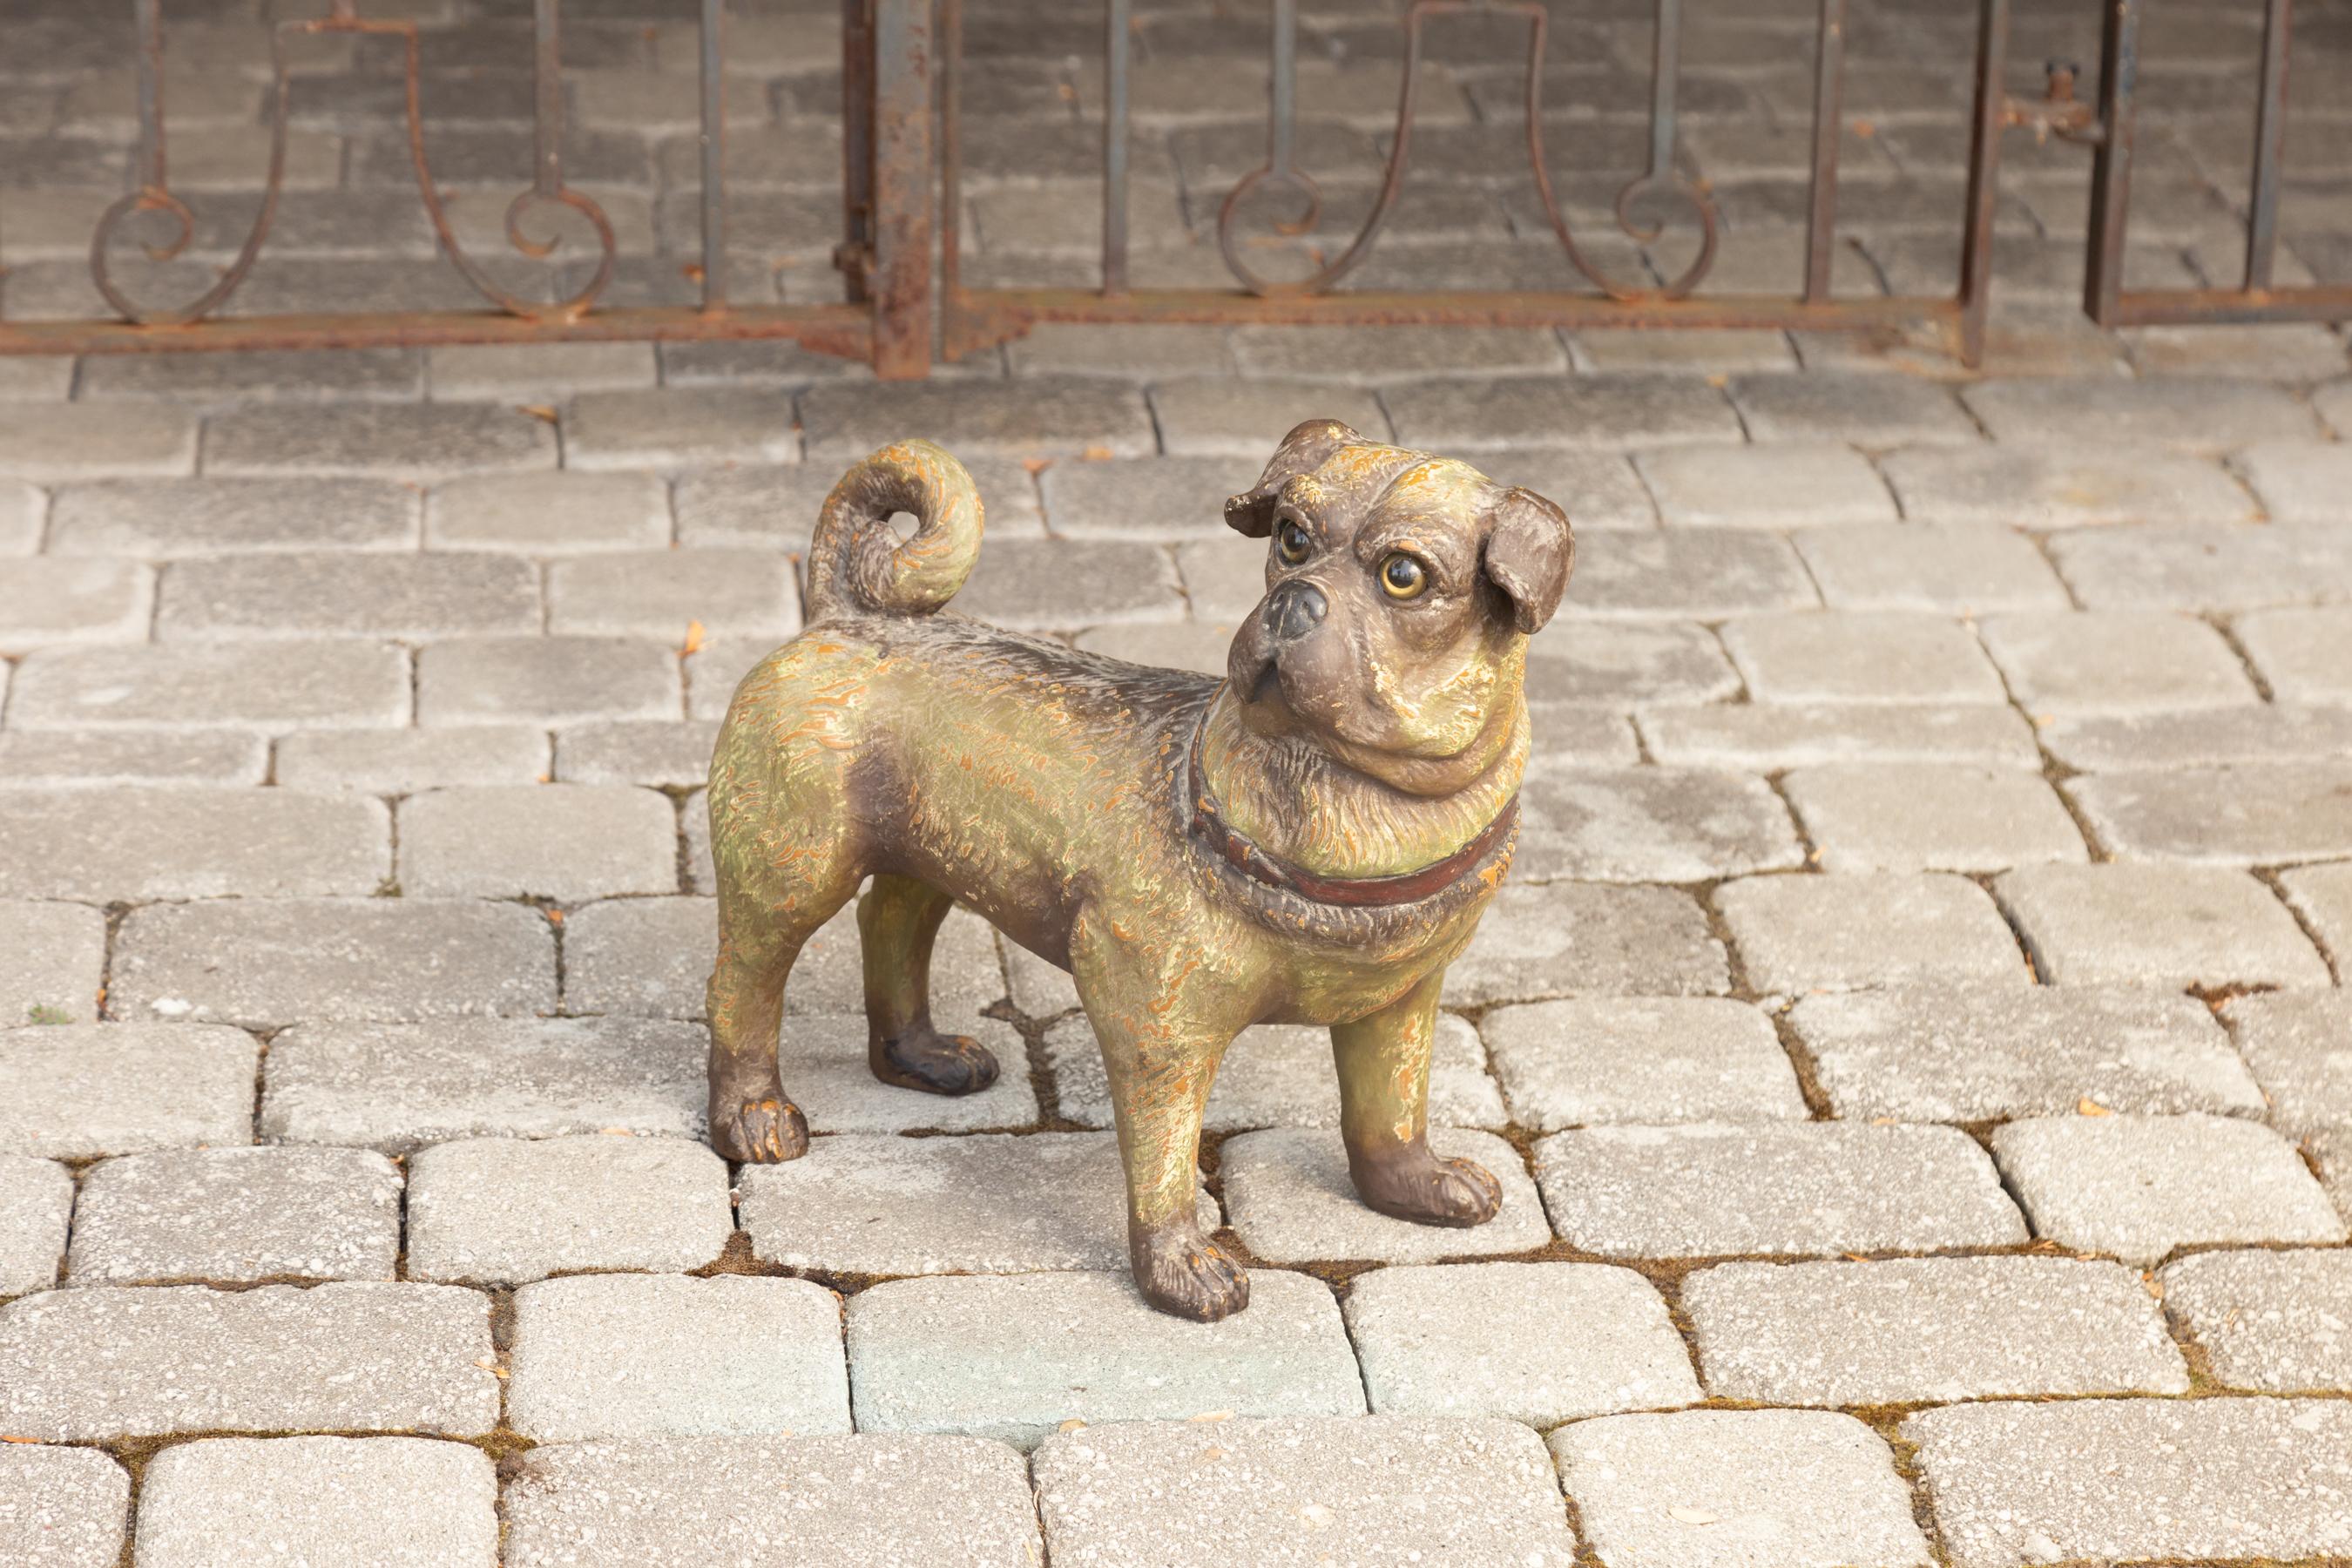 A vintage English composition standing dog sculpture from the 20th century, with glass eyes and red collar. Crafted in England during the midcentury period, this dog sculpture features a pug standing proudly and firmly on his four paws, in an alert